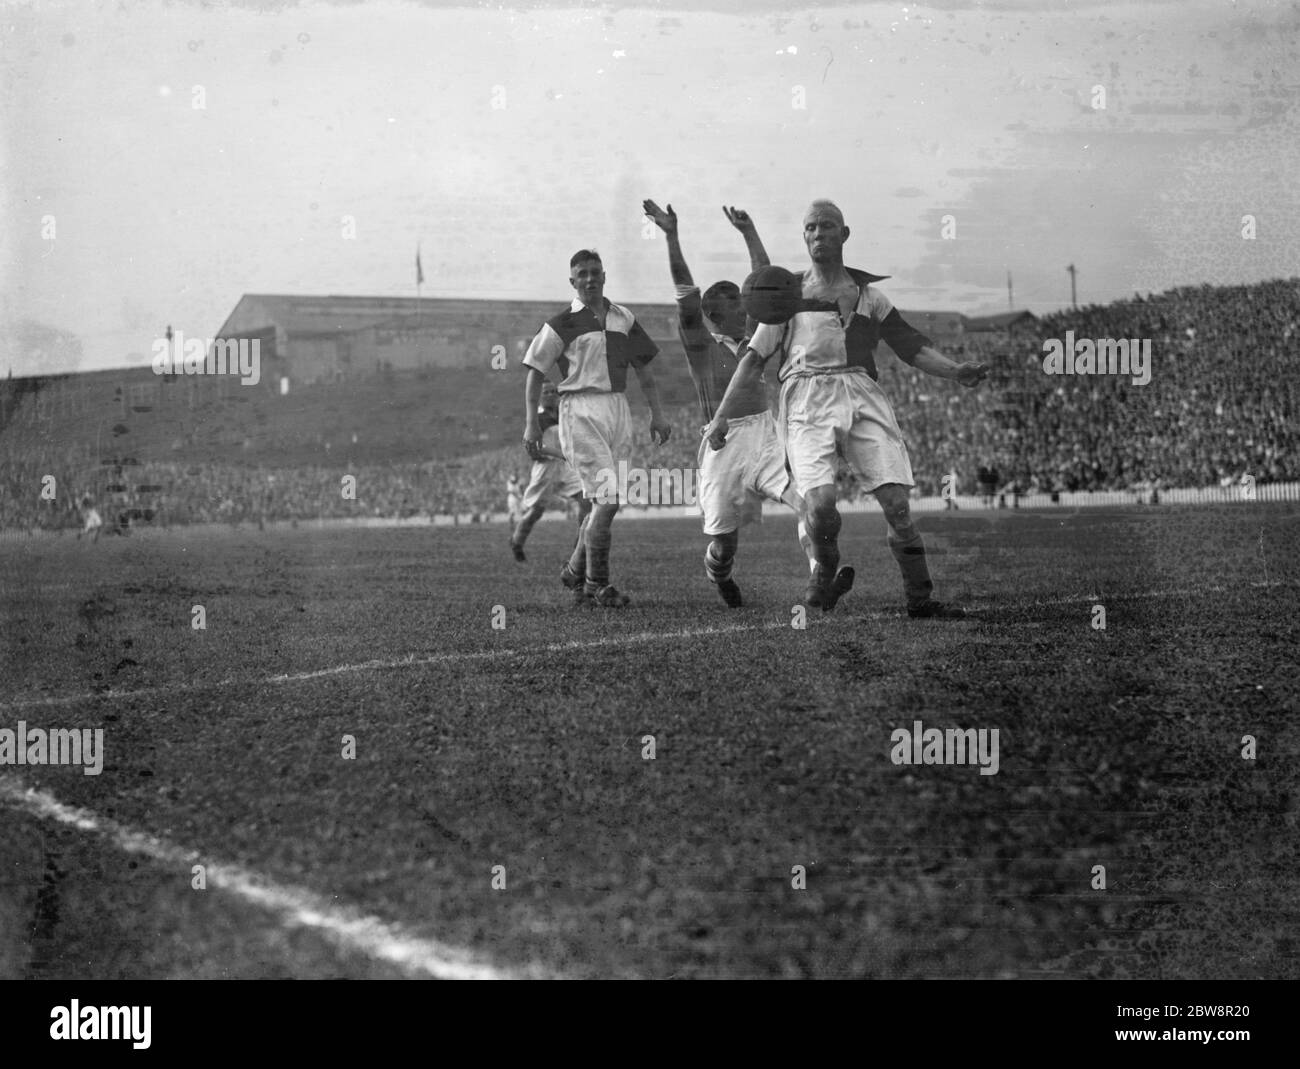 Newport County Association Football Club versus Millwall Football Club . Players compete for the ball . 1936 Stock Photo